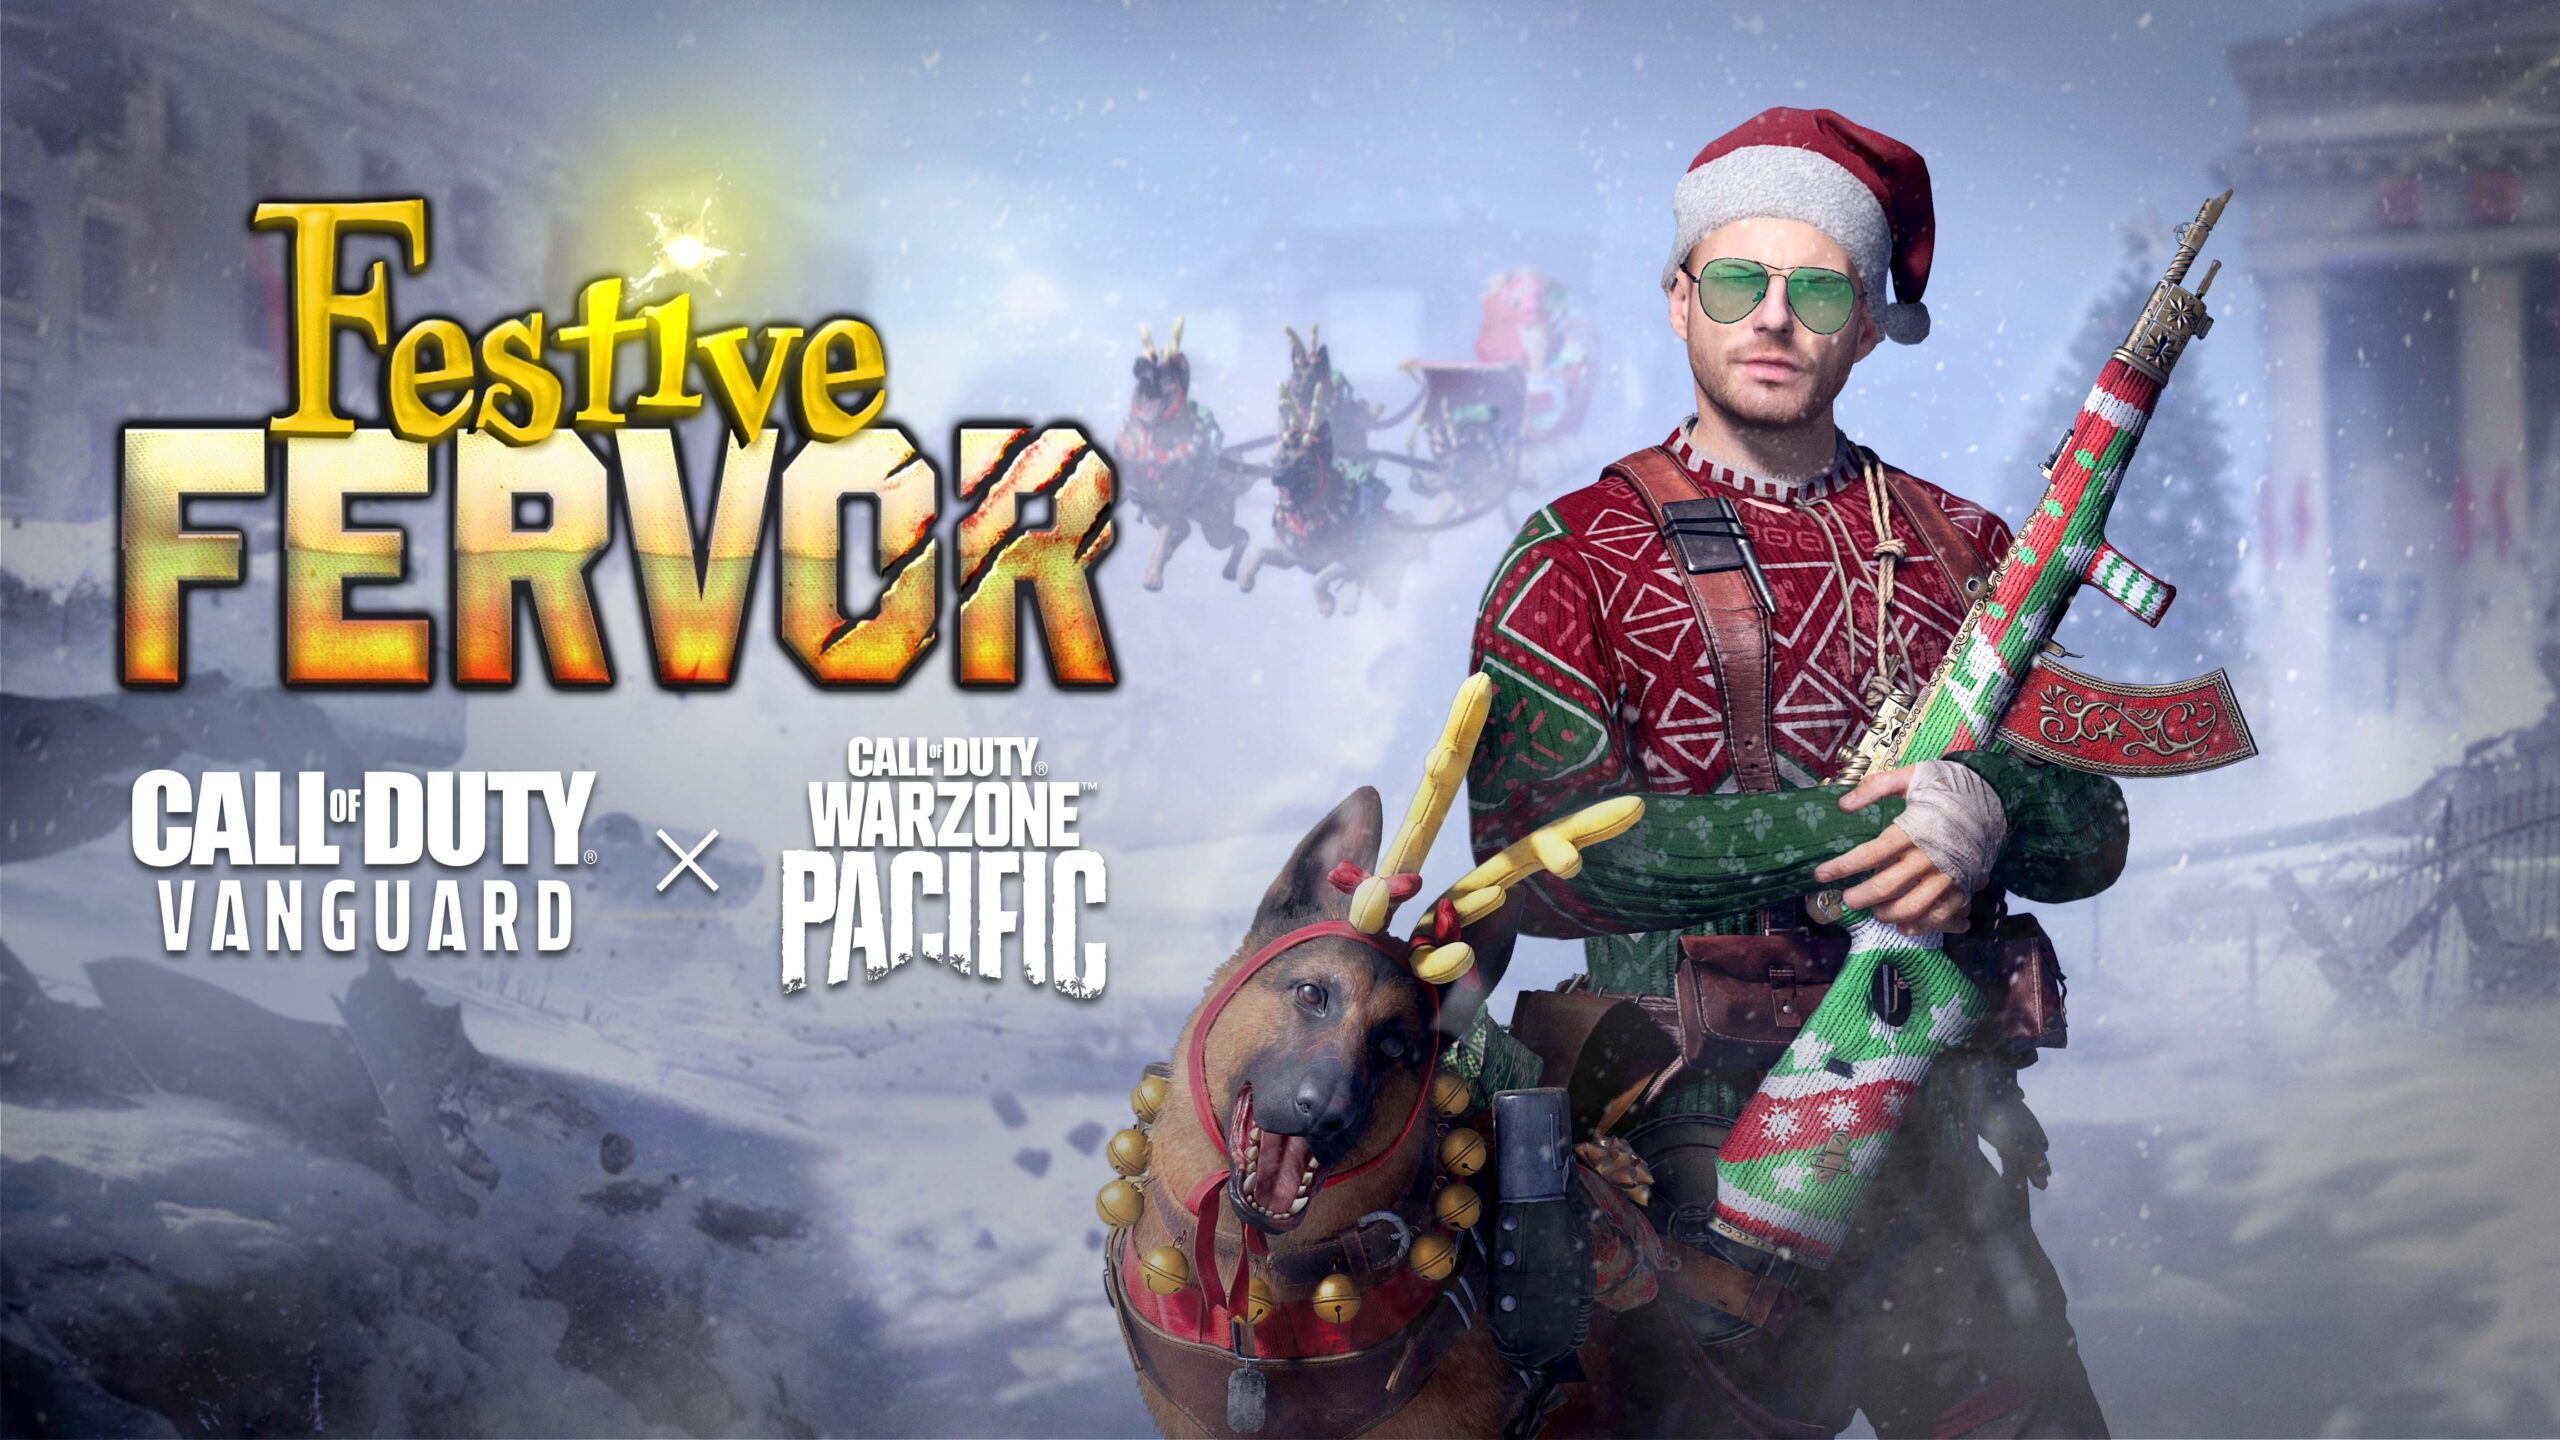 Call Of Duty Celebrates The Holidays With Festive Fervor Starting December 17 thumbnail